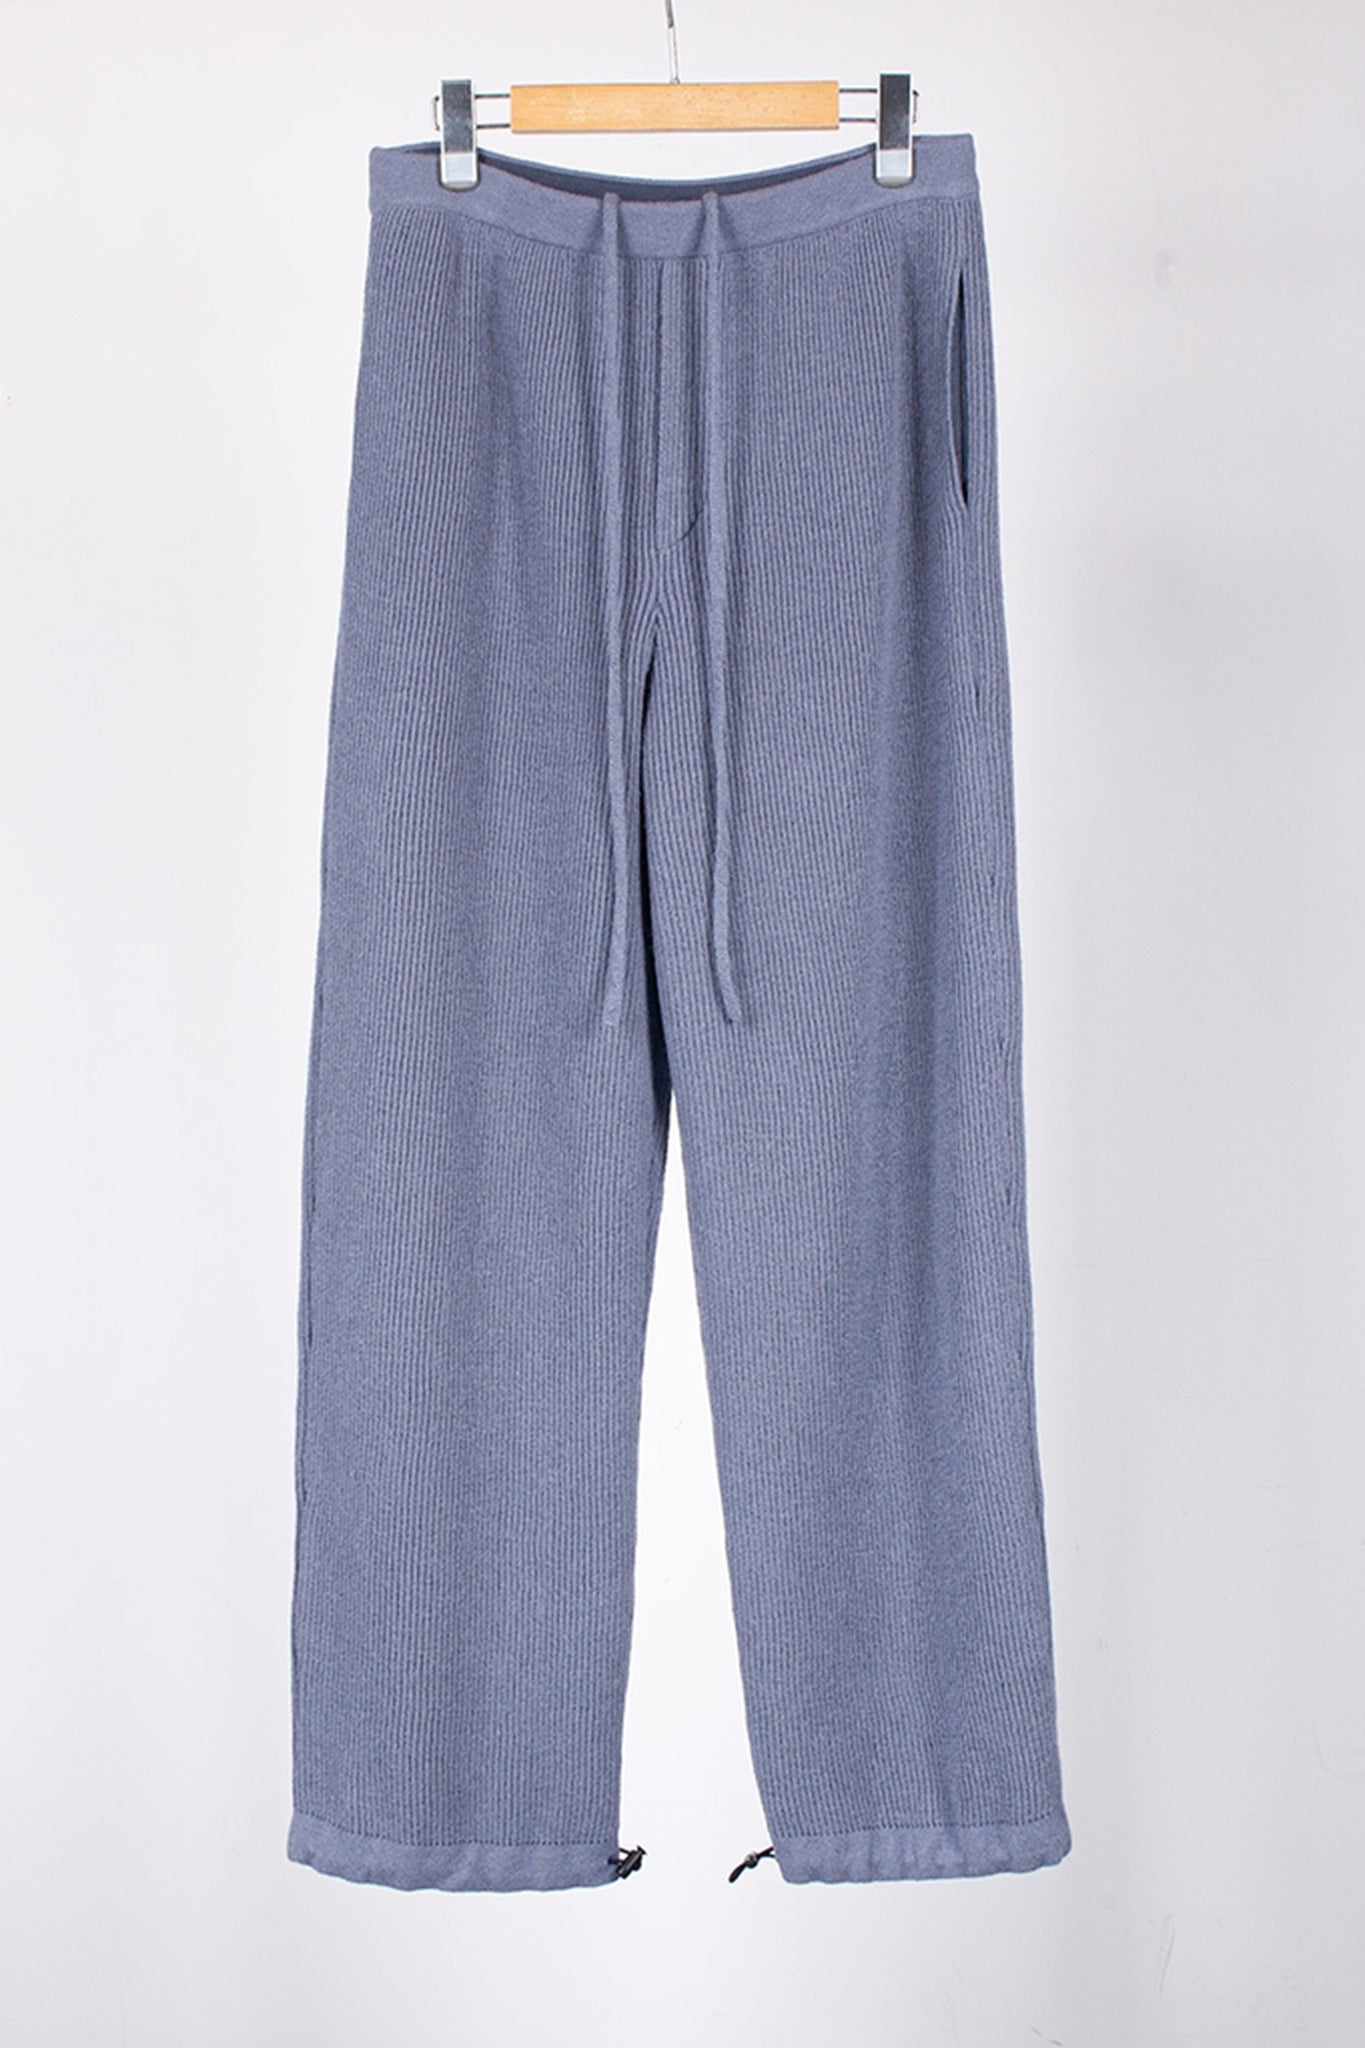 THE INOUE BROTHERS... "BABY ALPACA PANTS/LILAC"